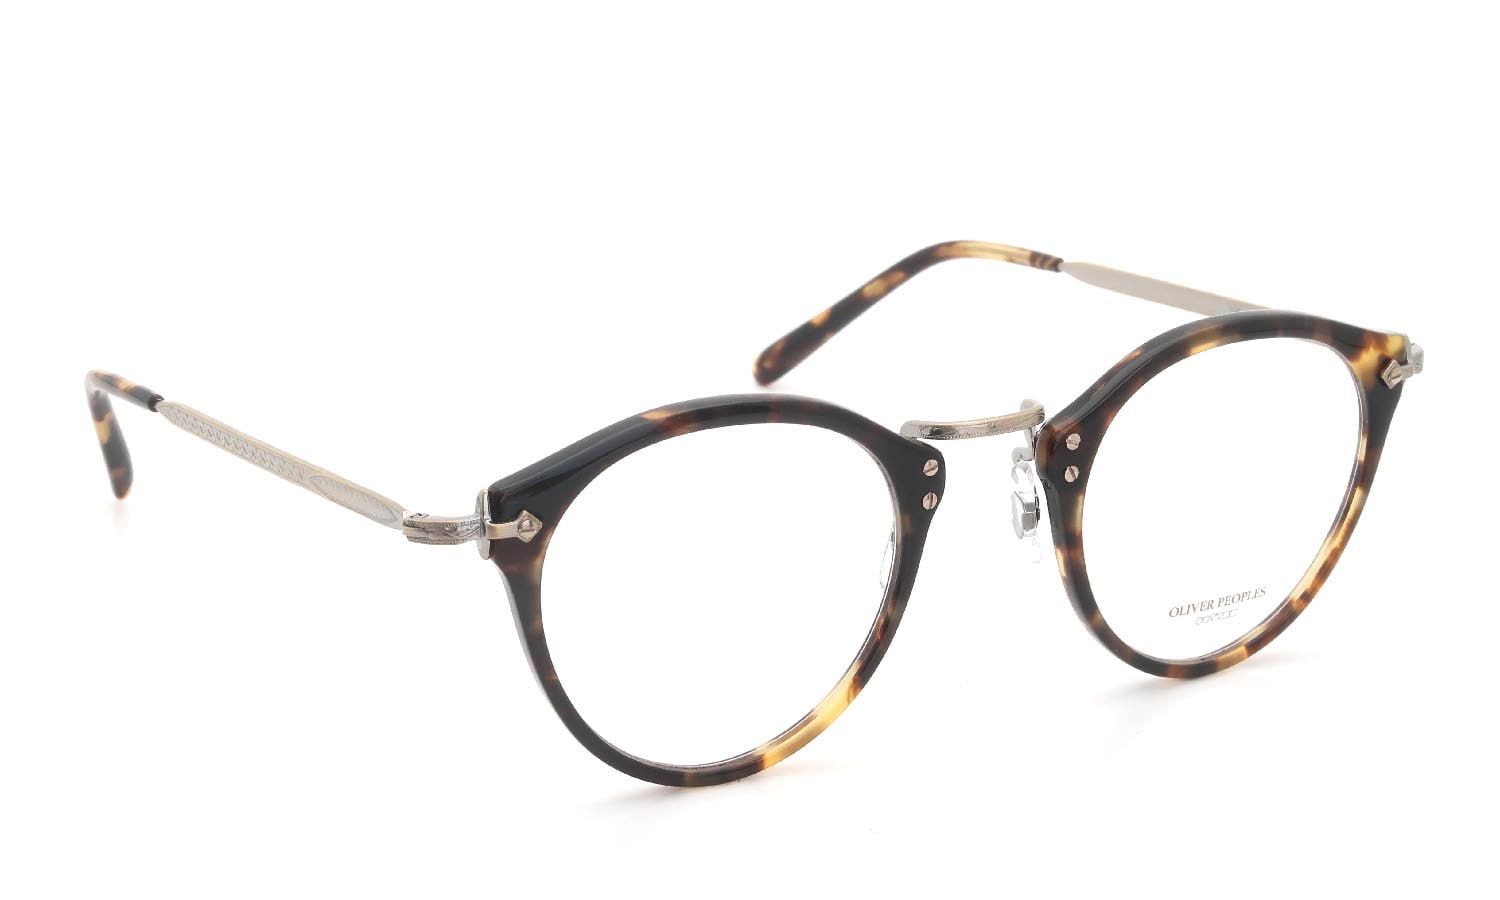 OLIVER PEOPLES archive メガネ通販 OP-505 DTB Limited Edition 雅 